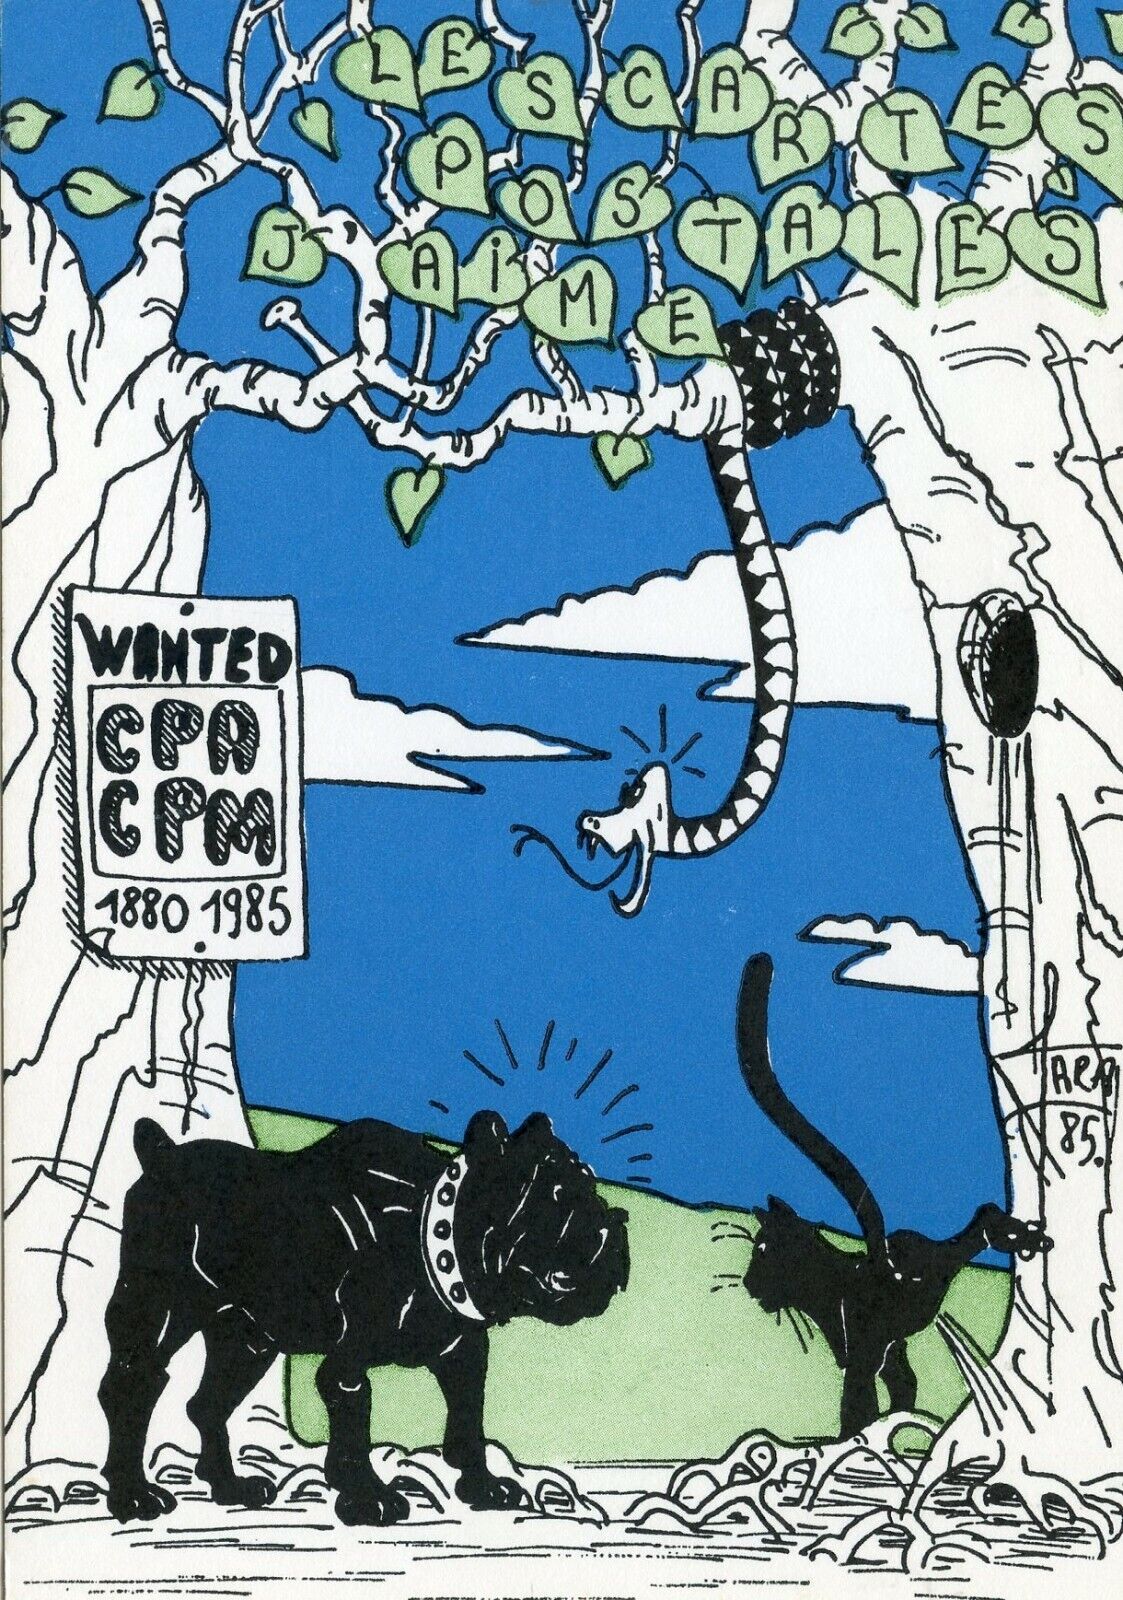 CPSM FANCY / WINTED CPA // CPM 1880/1985 // ILLUSTRATOR FARABOZ CHIEN CHAT